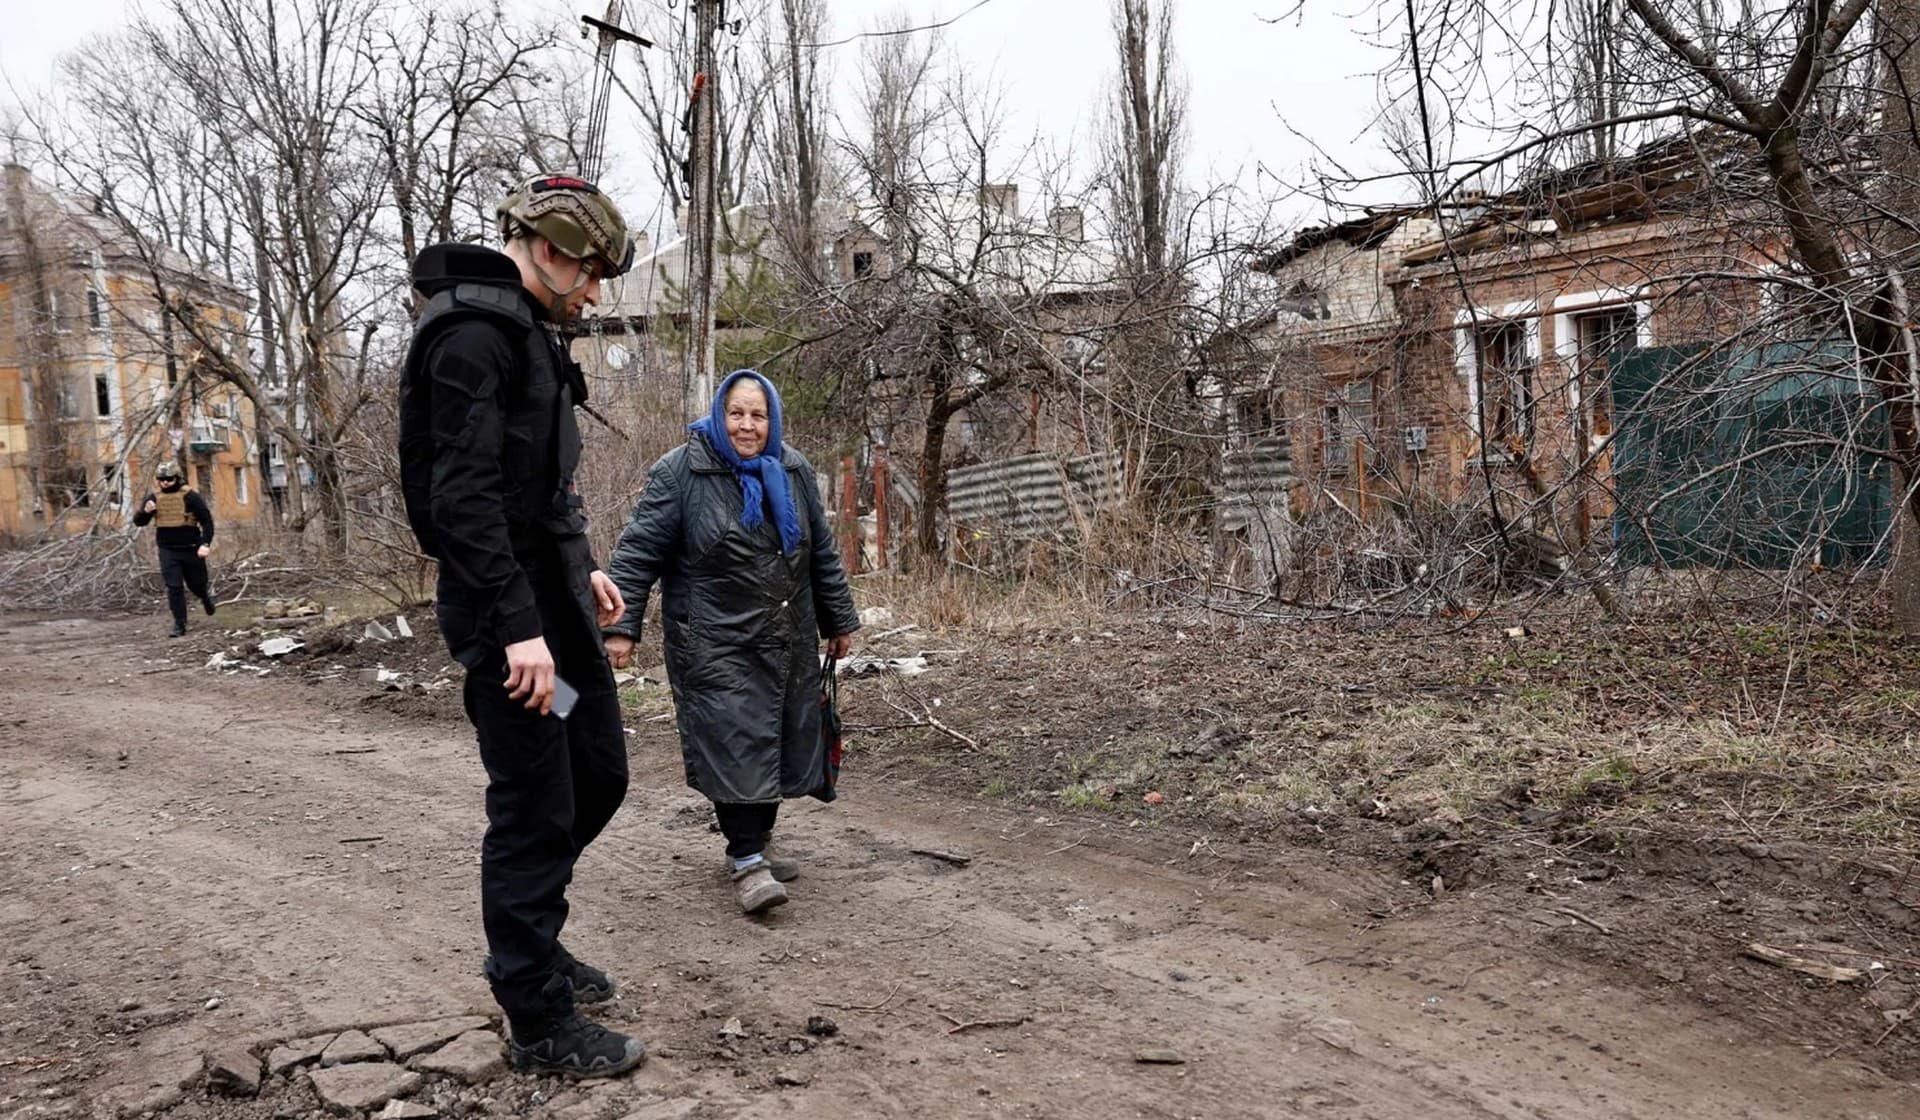 A Ukrainian volunteer tries to convince a resident to evacuate near the frontline in Chasiv Yar